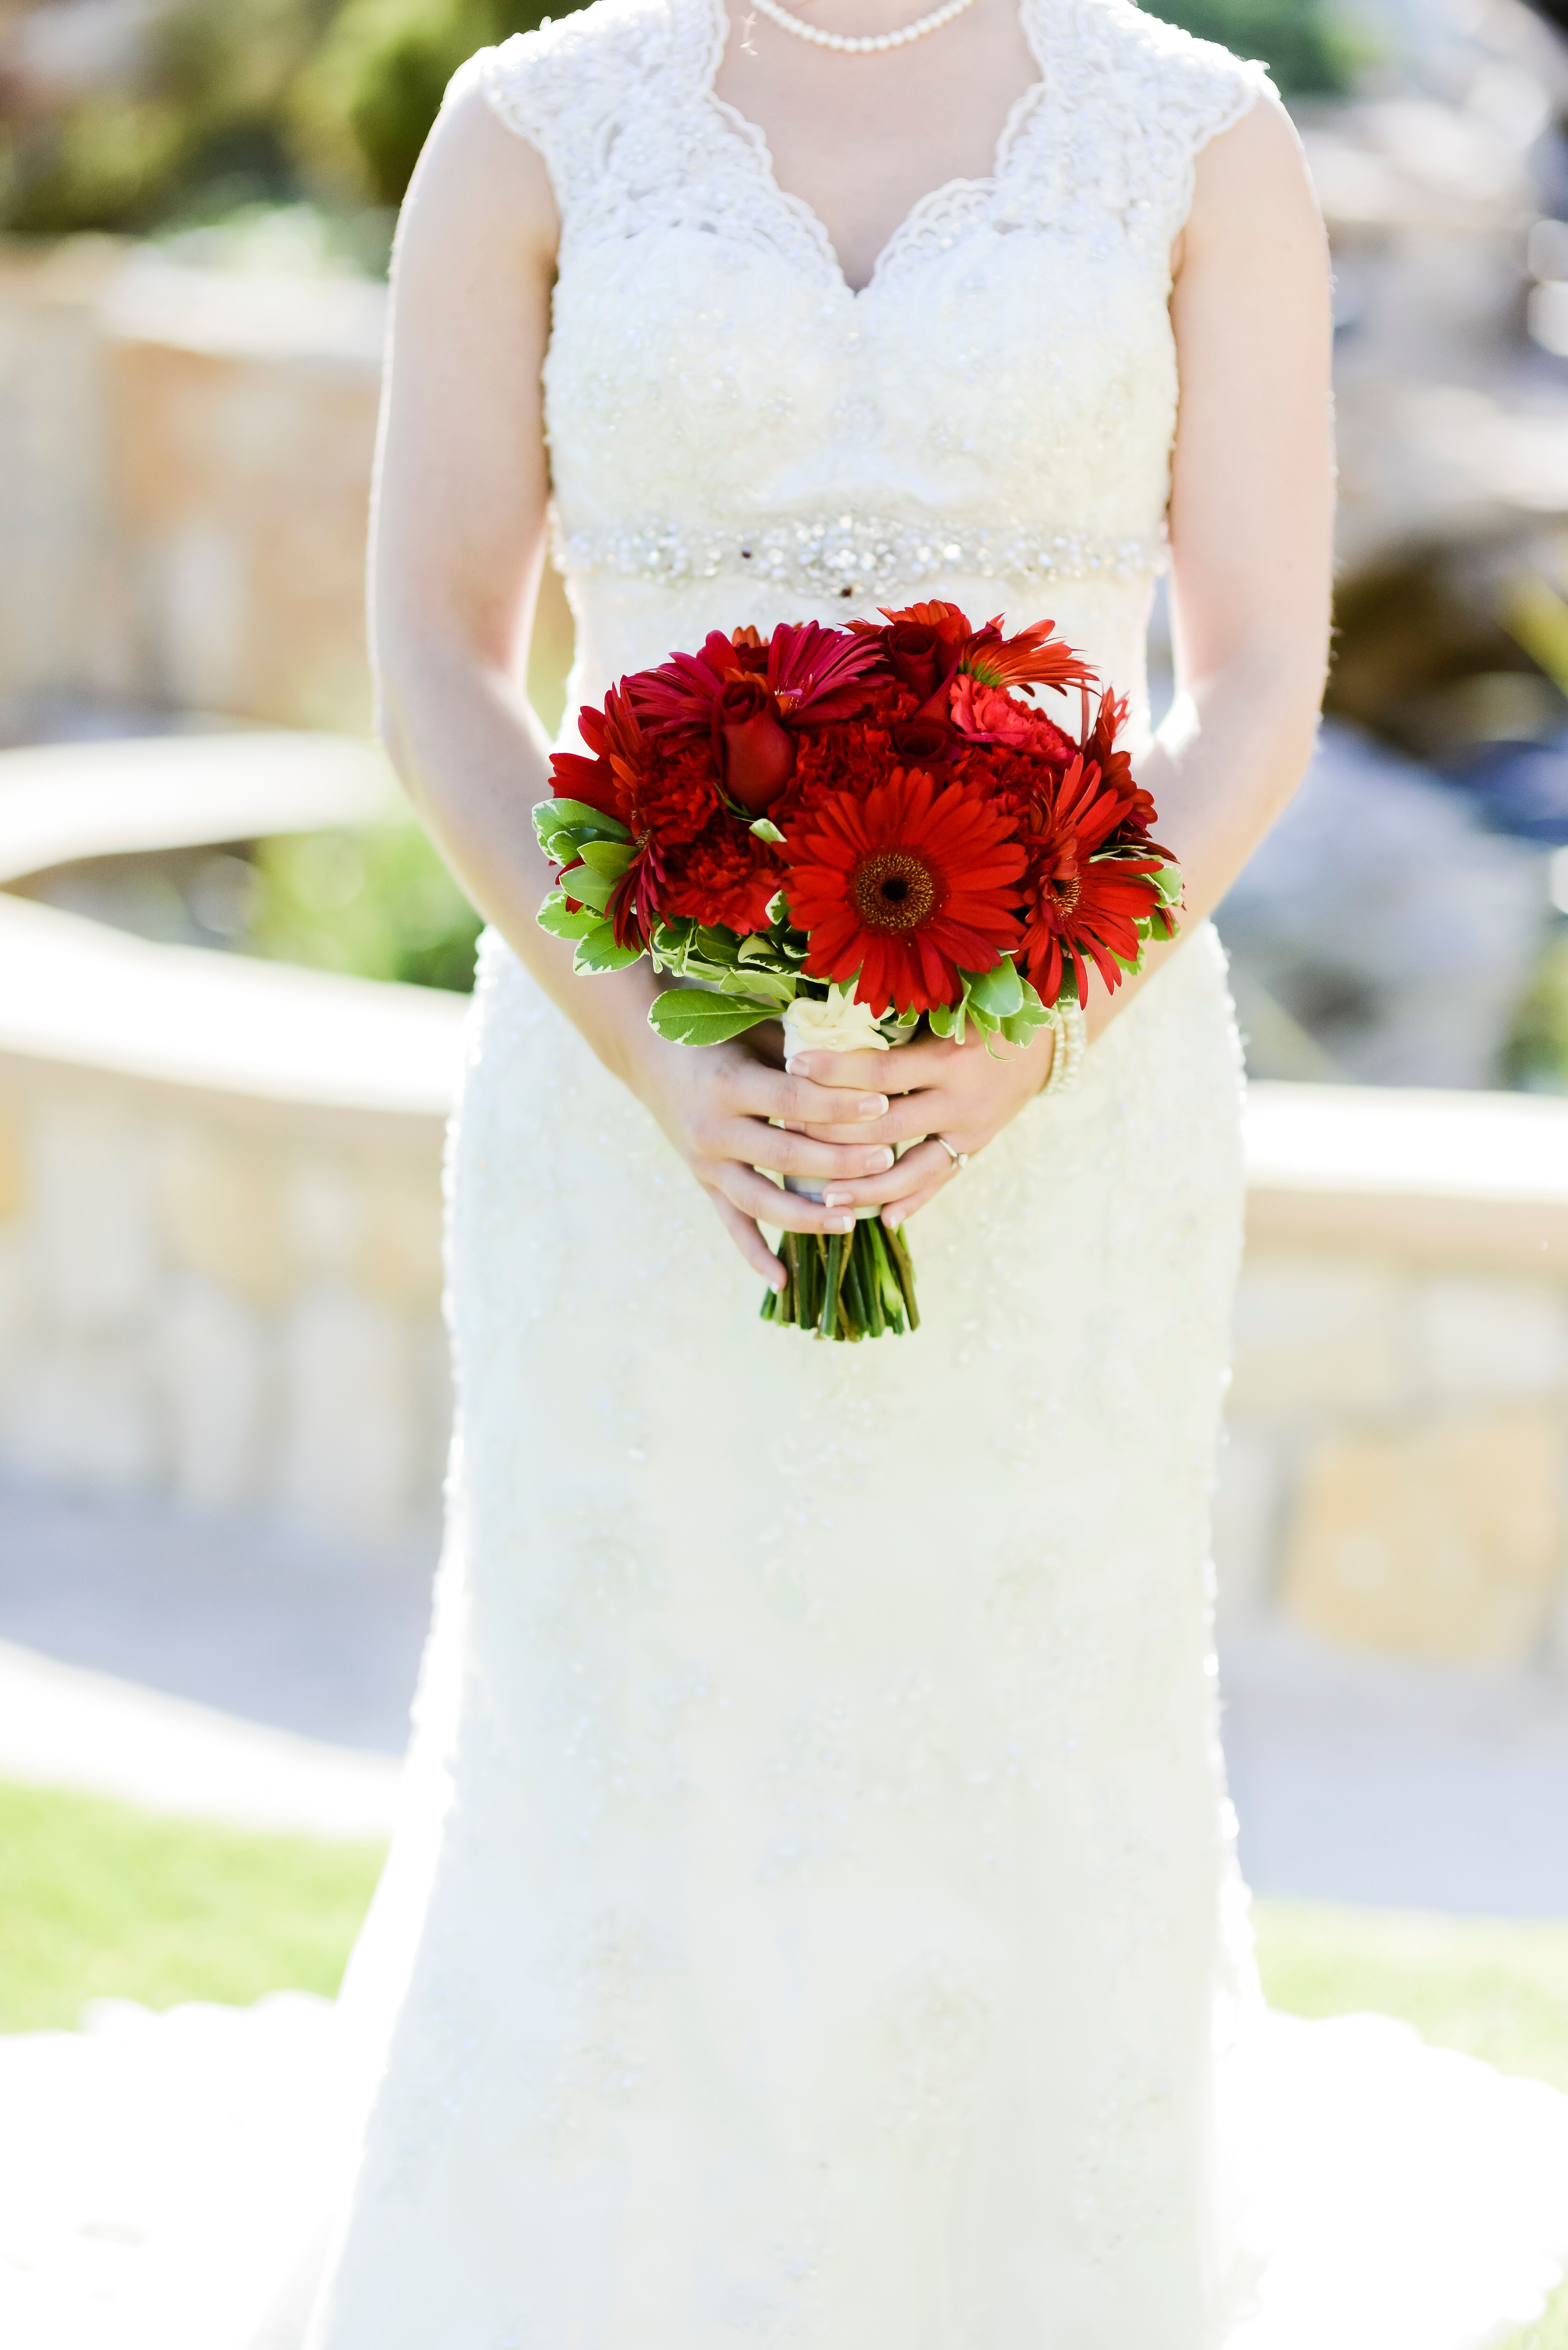 Red Rose and White Daisy Bouquet  Red rose bouquet wedding, Red rose  wedding, White daisy bouquet